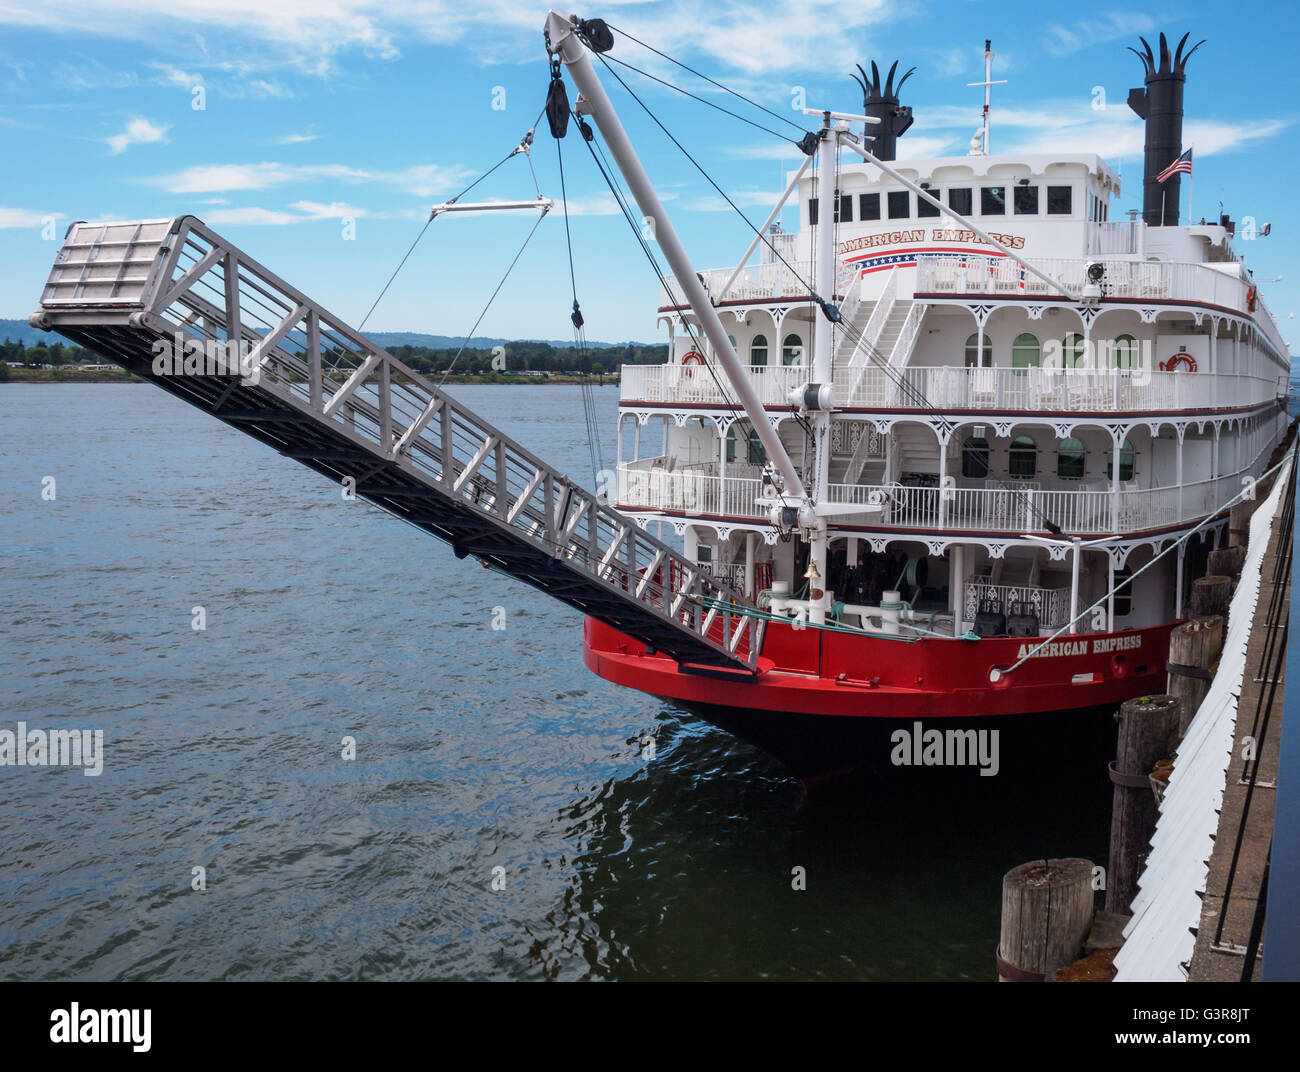 Image of the paddle wheel ship American Empress docked at Vancouver Washington.  The vessel takes passengers on excursions. Stock Photo